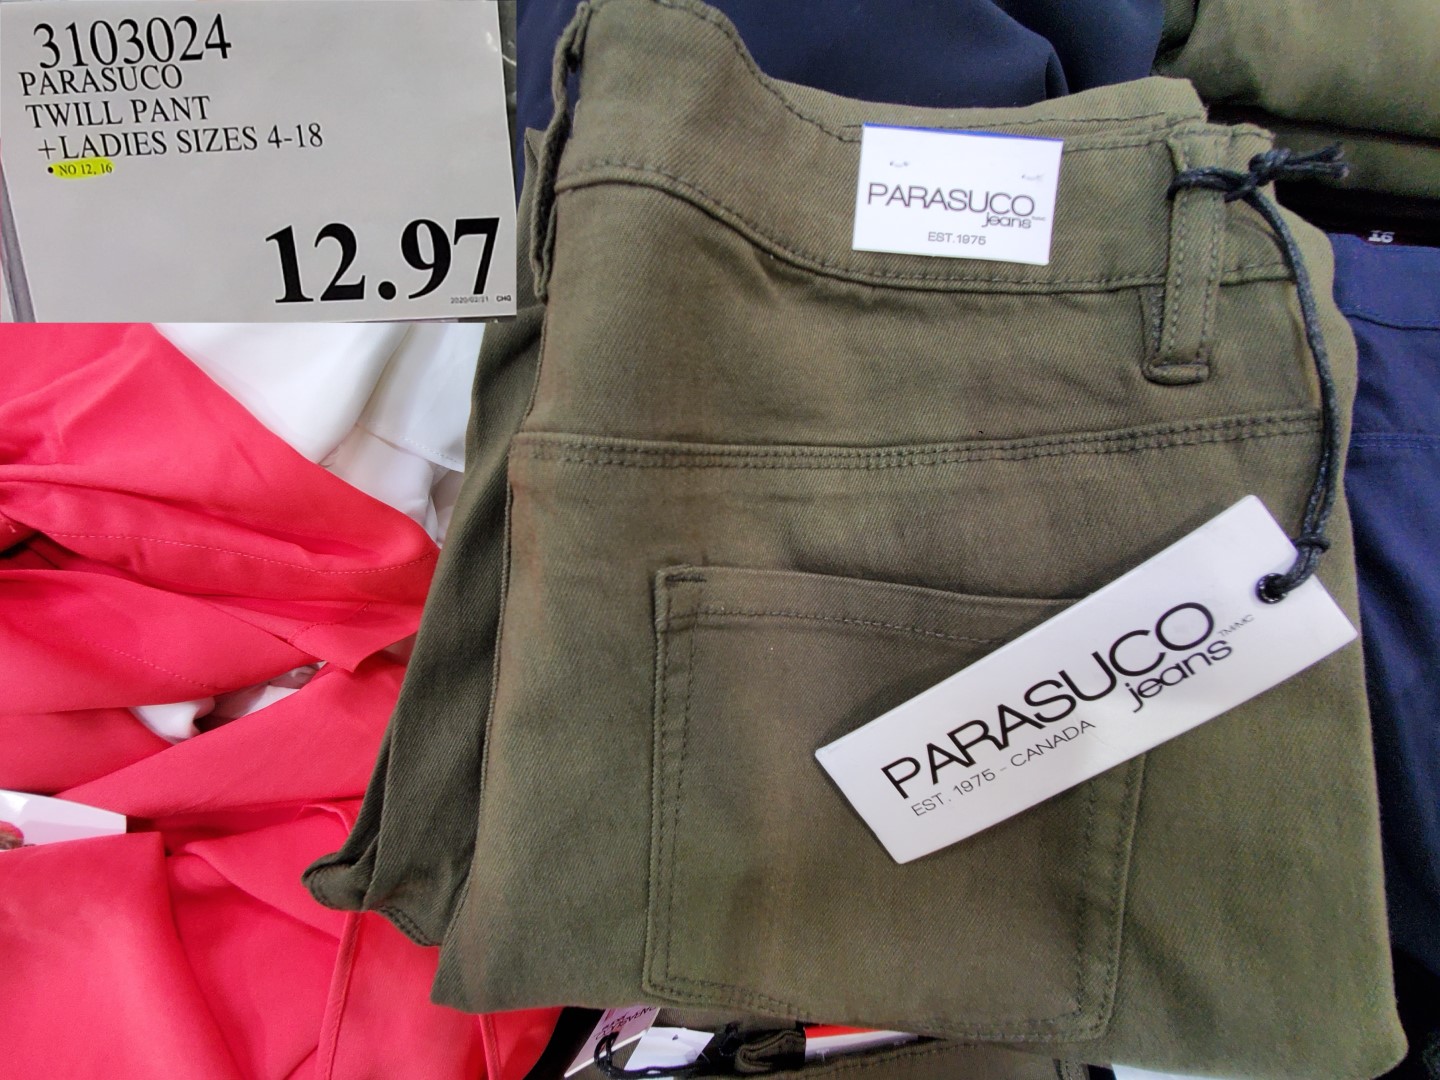 3103024 PARASUCO TWILL PANT LADIES SIZES 4 18 12 97 - Costco East Fan Blog